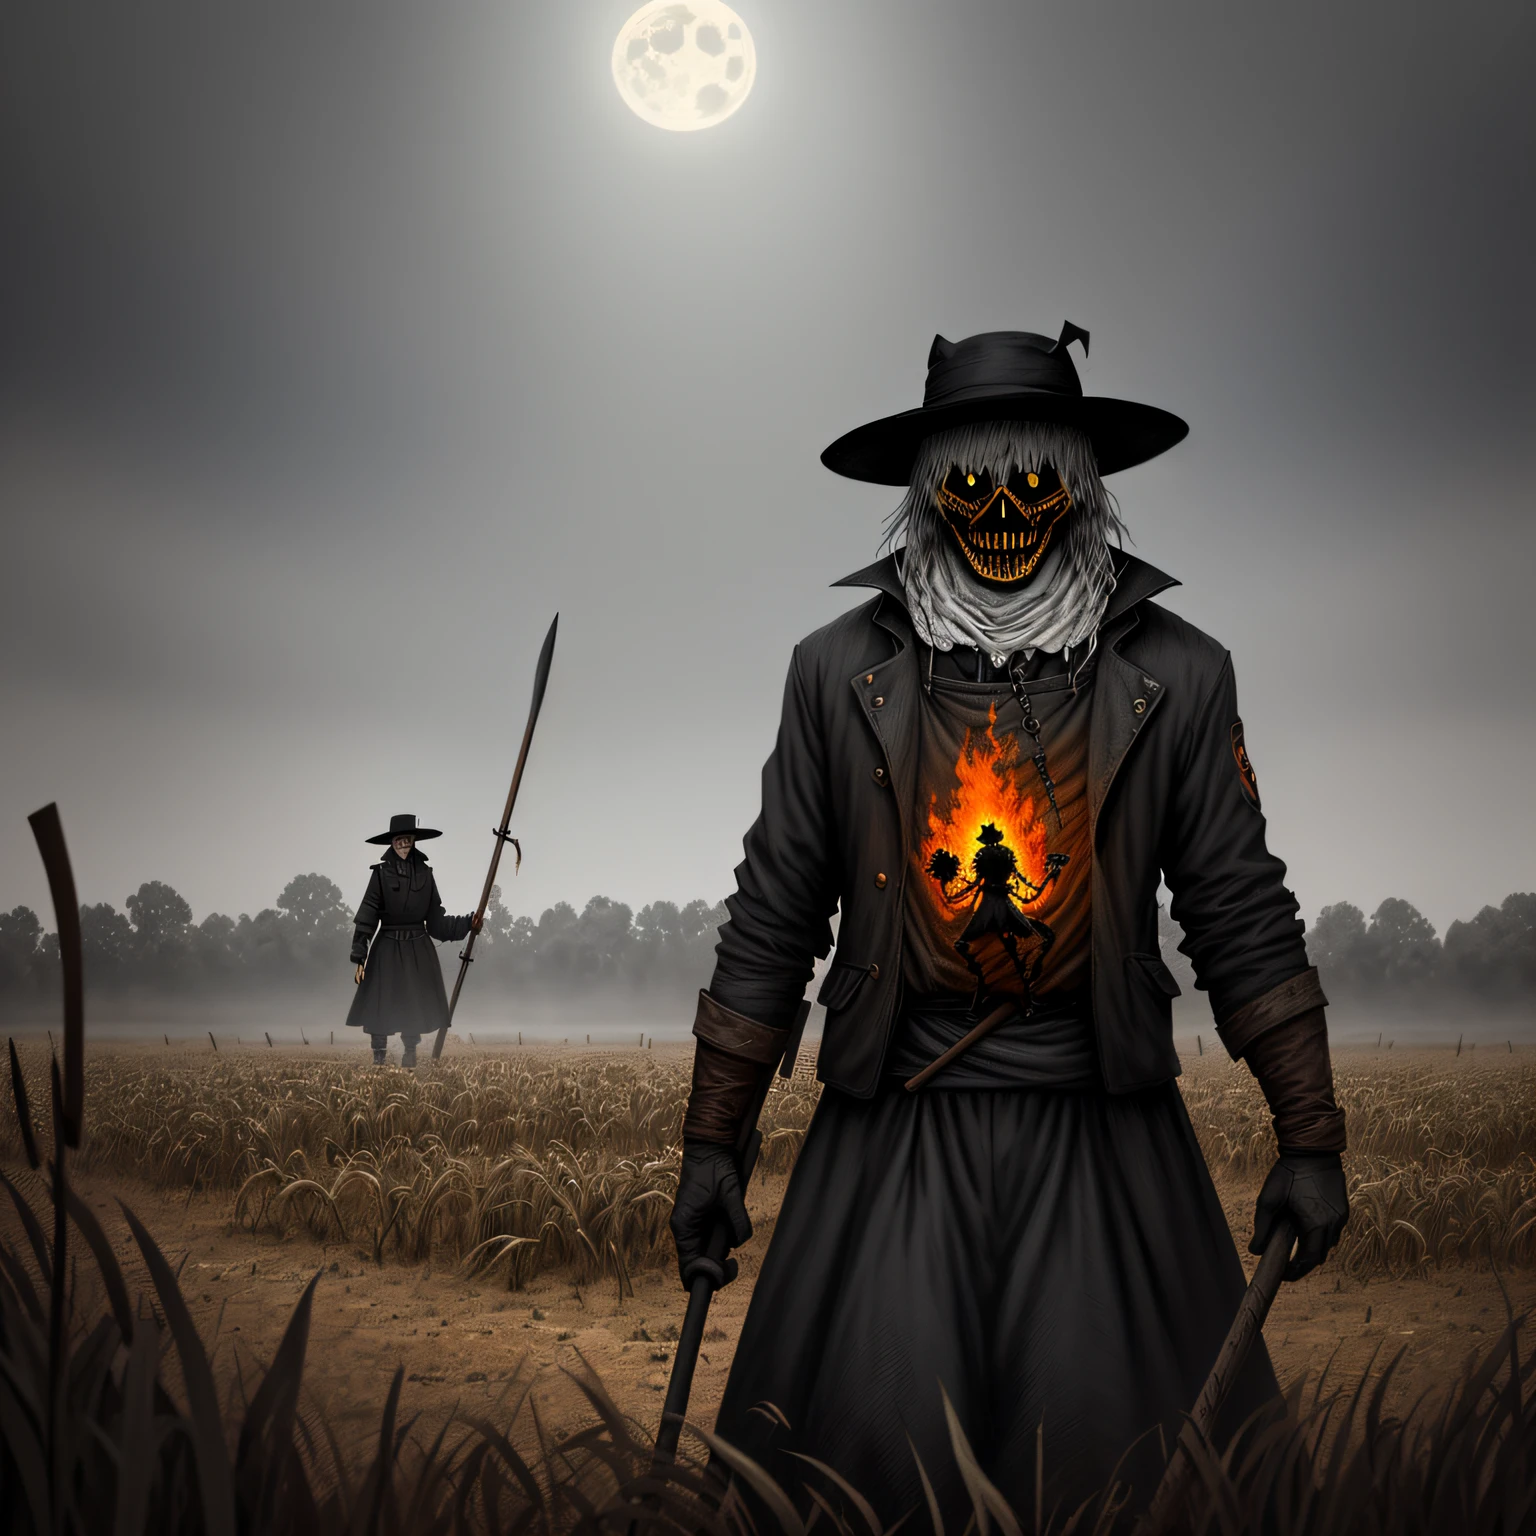 In the middle of a vast plantation of pumpkins, stands an imposing scarecrow. His body made of straw, dressed in old clothes and colorful patches, is standing on a wooden stake driven into the ground. His face is a wooden mask with grotesque features, painted in shades of weather-worn brown.

The stormy sky serves as the backdrop for this scene. Dark, charged clouds cover the entire horizon, heralding the arrival of an impending storm. The rays cut through the sky, illuminating the pumpkin plantation in fleeting moments.

In the air, a flock of crows flies in circles around the scarecrow. Its black feathers contrast with the gray sky, giving an even more sinister air to the scene. The crows grunt loudly and dive occasionally toward the scarecrow, only to dodge at the last moment, as if testing their mettle.

The pumpkins are scattered in rows ordered by the field, all of different sizes and at different stages of growth. Their vivid and vibrant colors contrast with the gloomy environment that surrounds them. Some of them have carved faces, creating a frightening atmosphere, while others are intact, waiting to be harvested.

This combination of elements creates a fascinating image: a lone scarecrow in the middle of a pumpkin plantation, surrounded by crows flying in a stormy sky. It is a mixture of beauty and melancholy, a visual representation of autumn, the passage of time and the imminence of the unknown. --auto